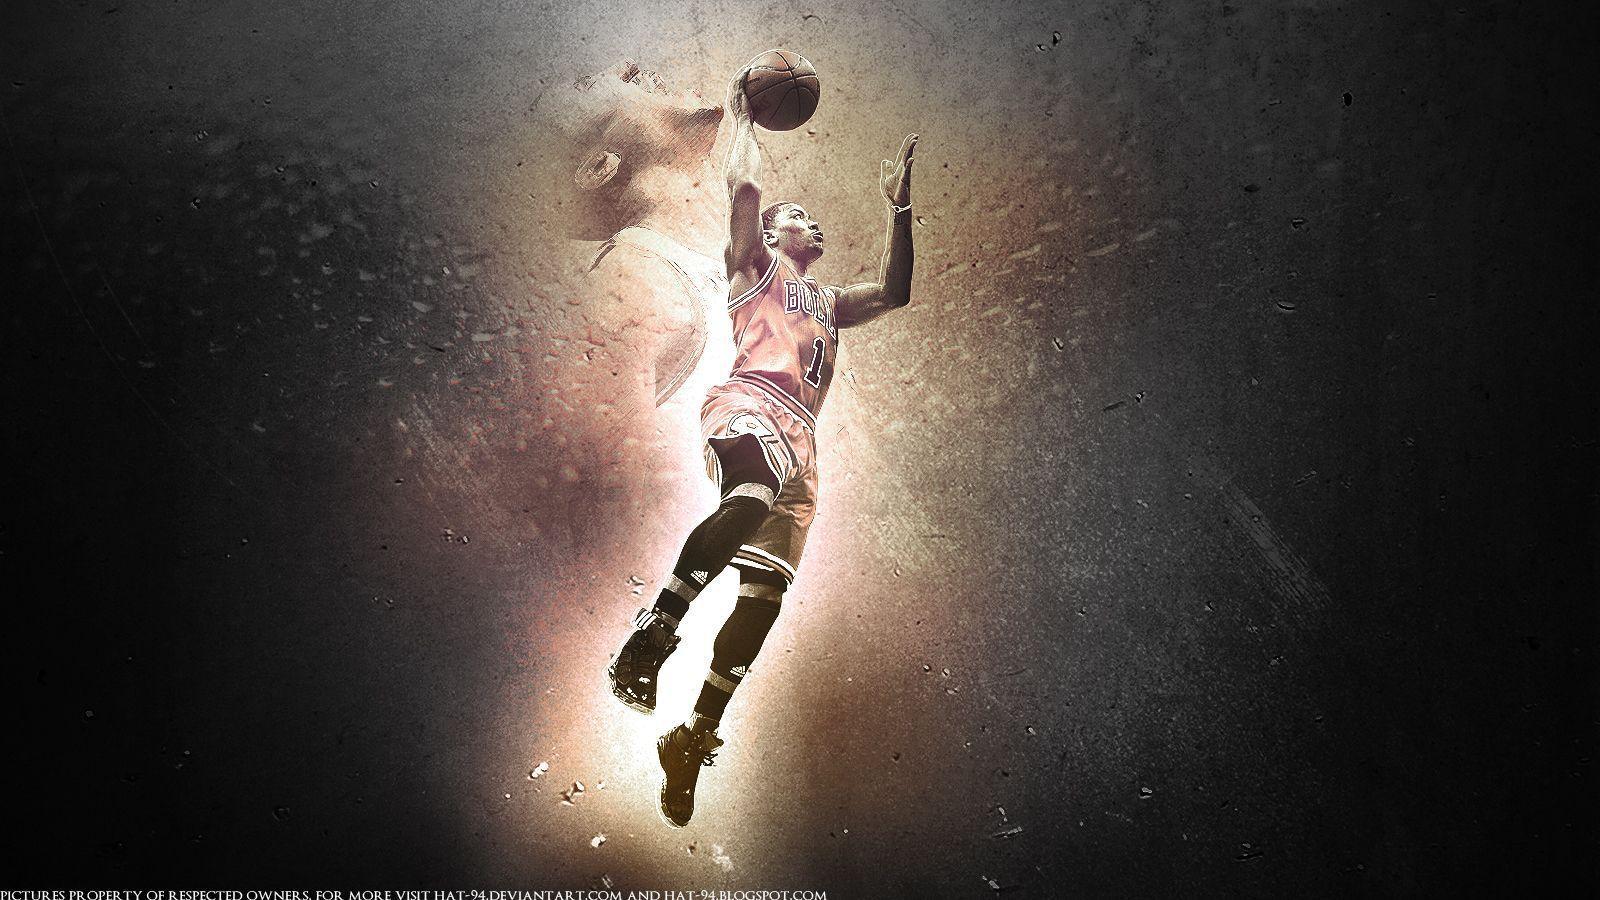 Derrick Rose 2 By Hat 94